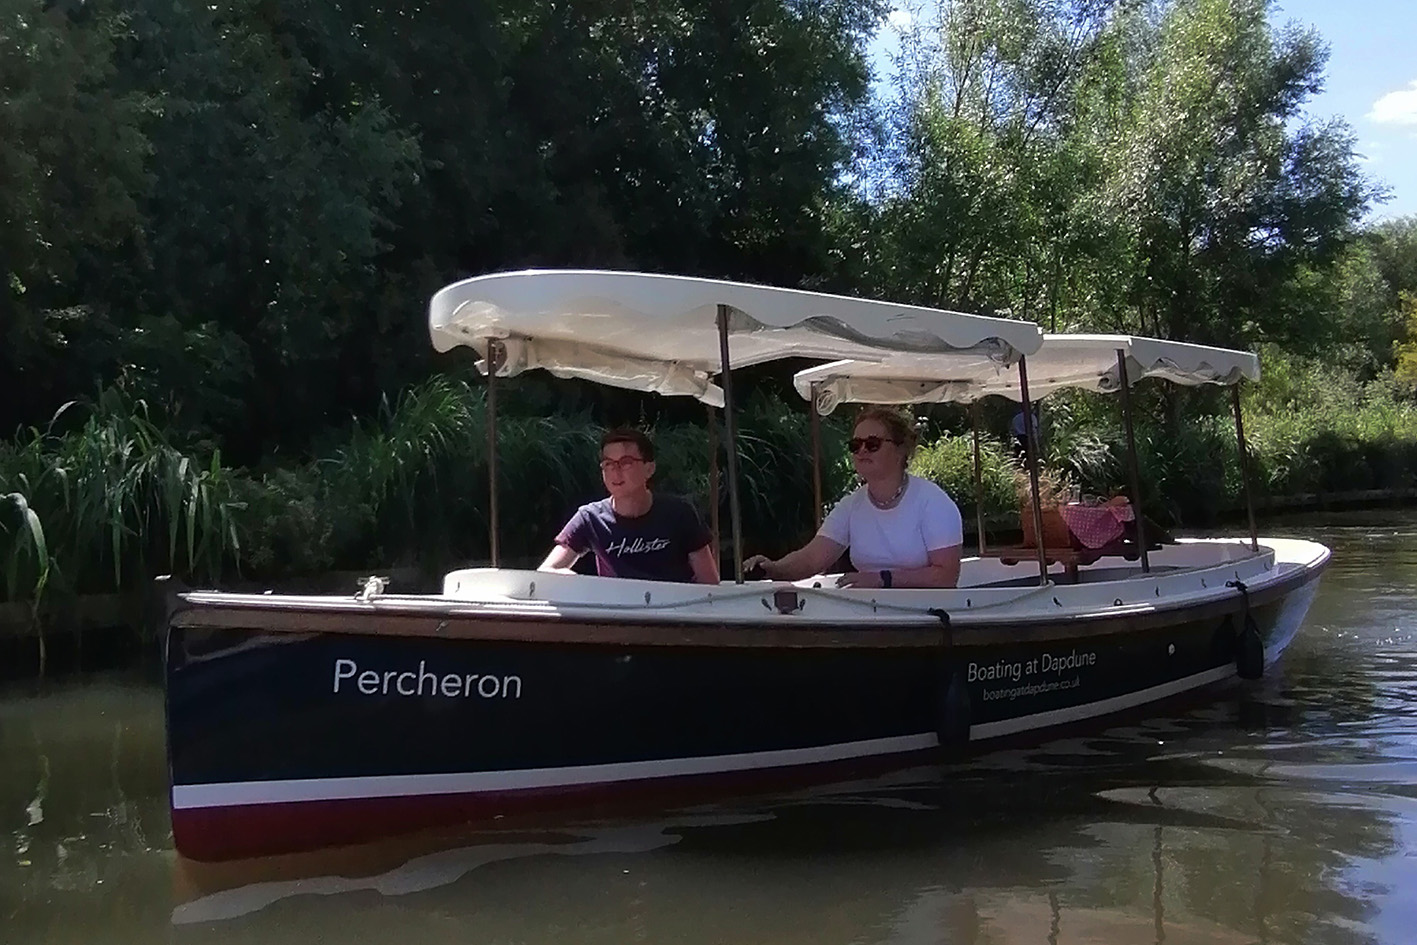 Comfortable day hire boat at Dapdune Wharf, Guildford